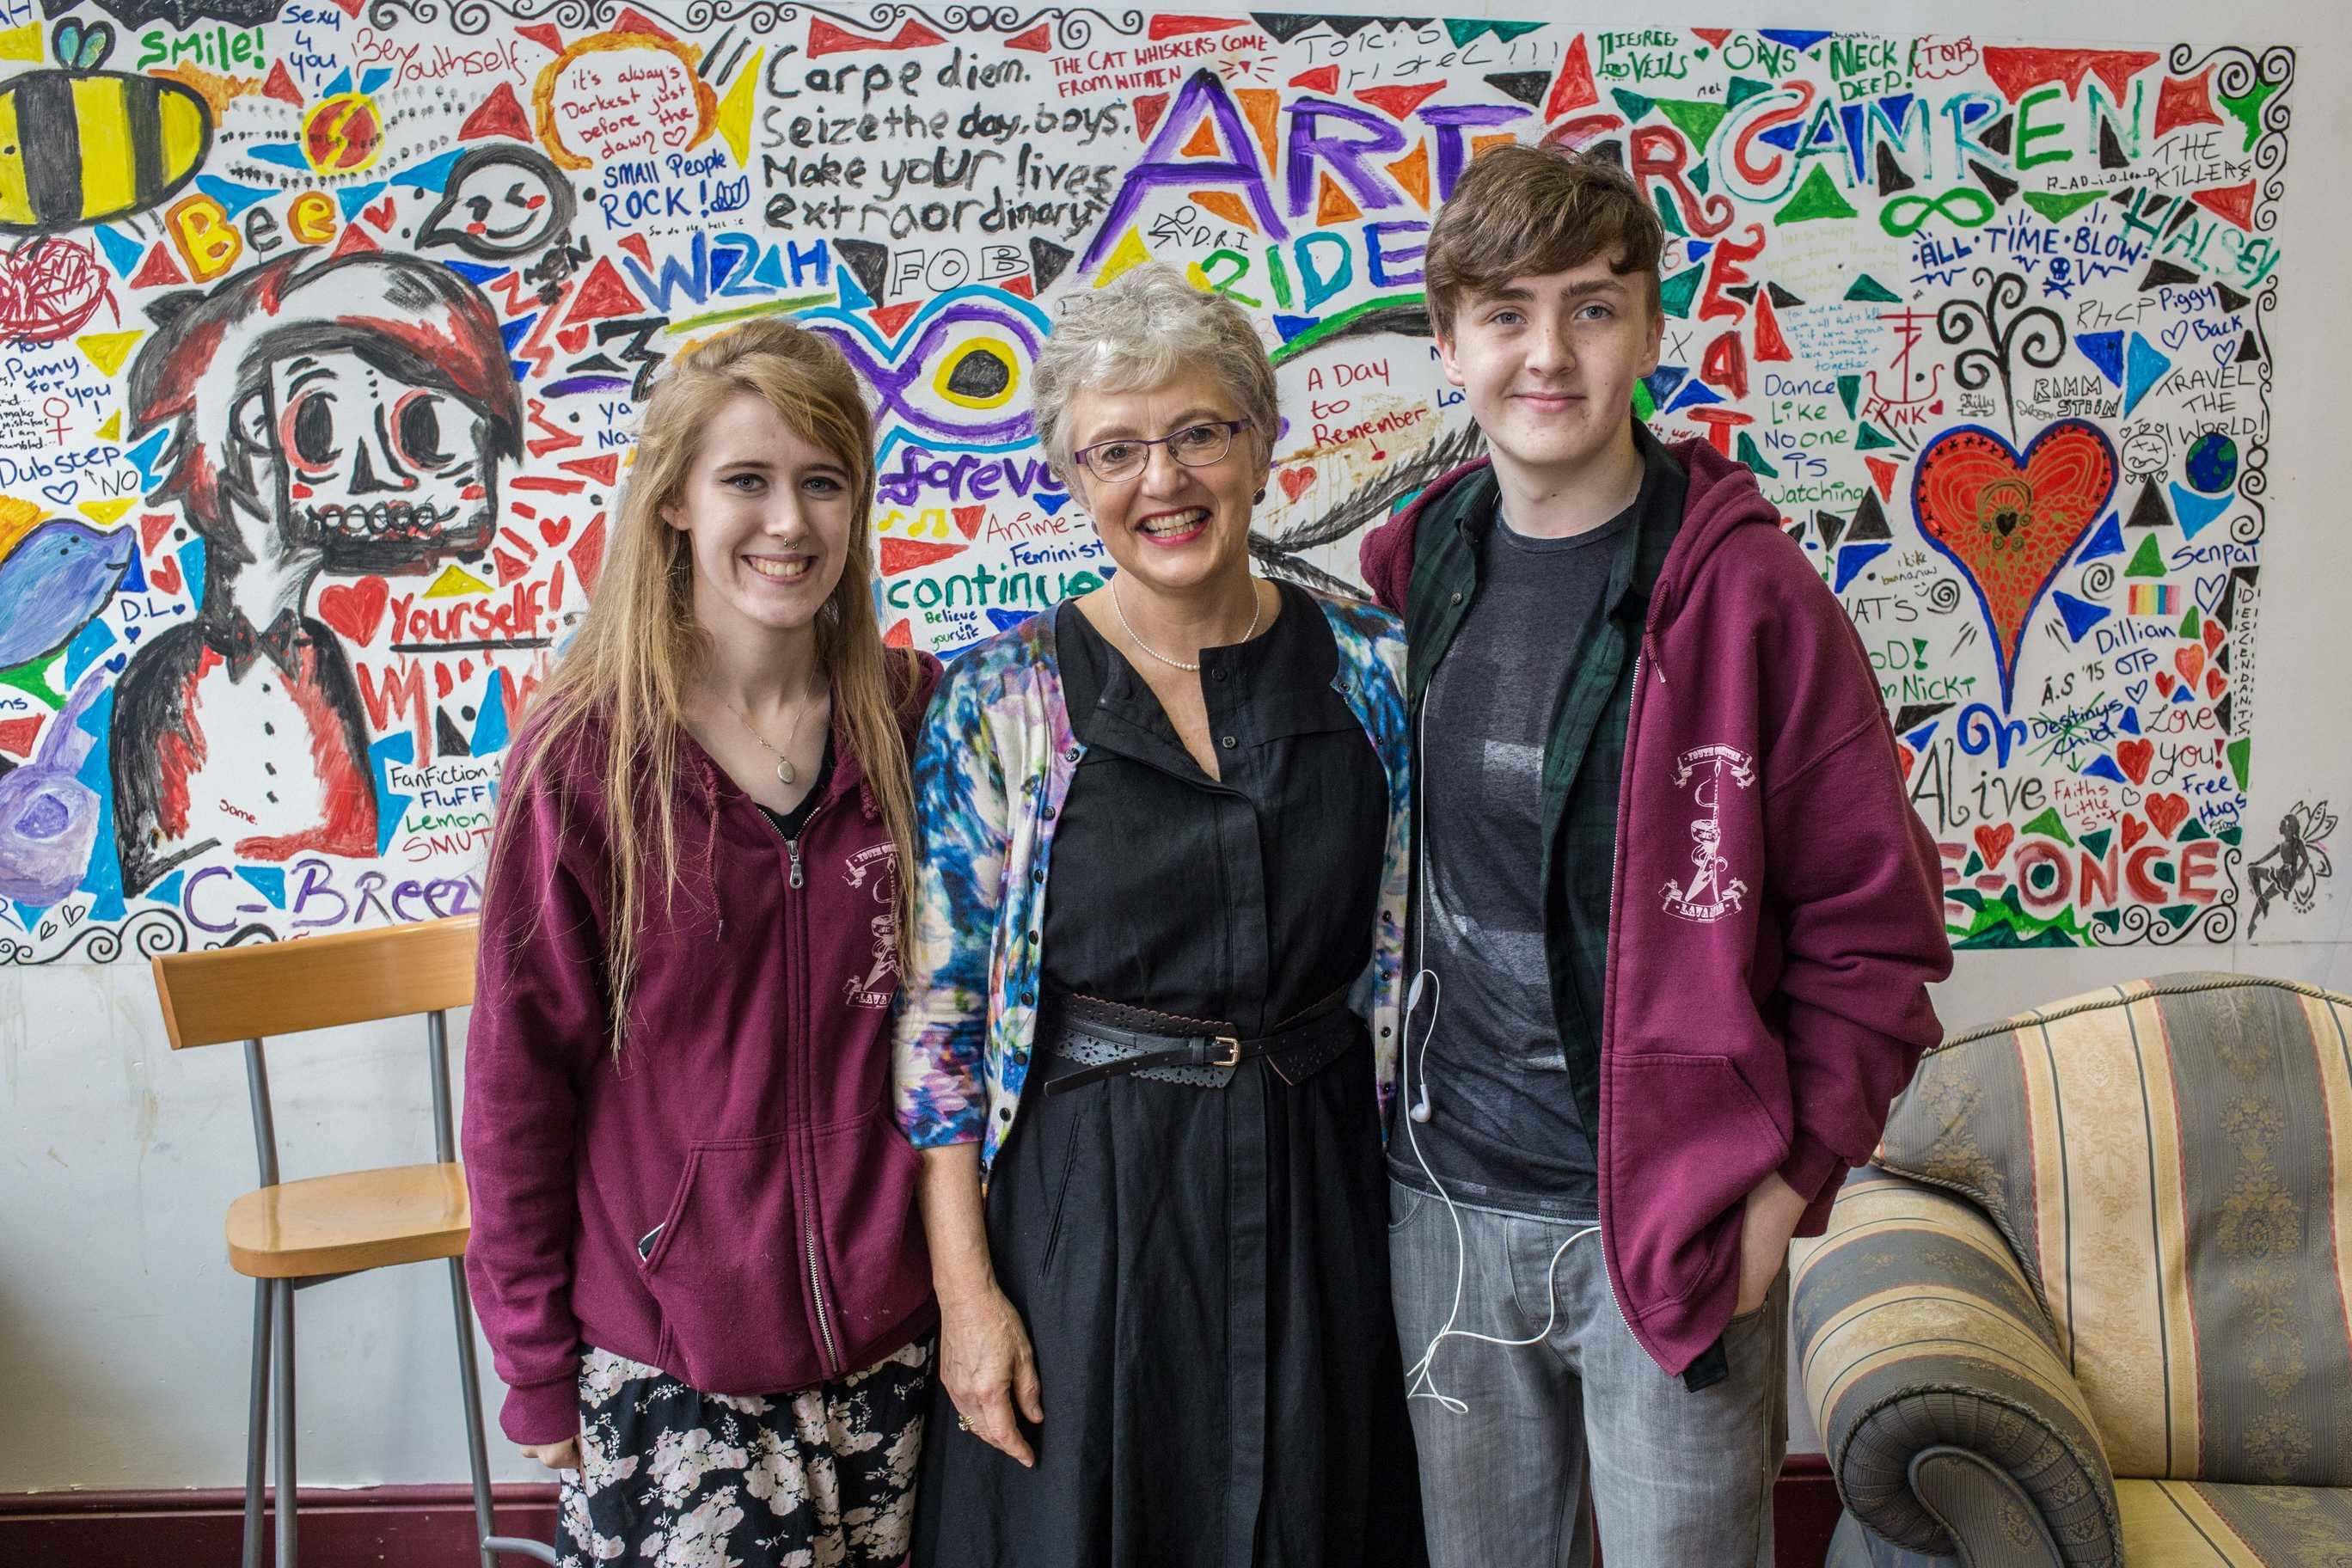 Early Years Leadership Minister Katherine Zappone visits Limerick Youth Service